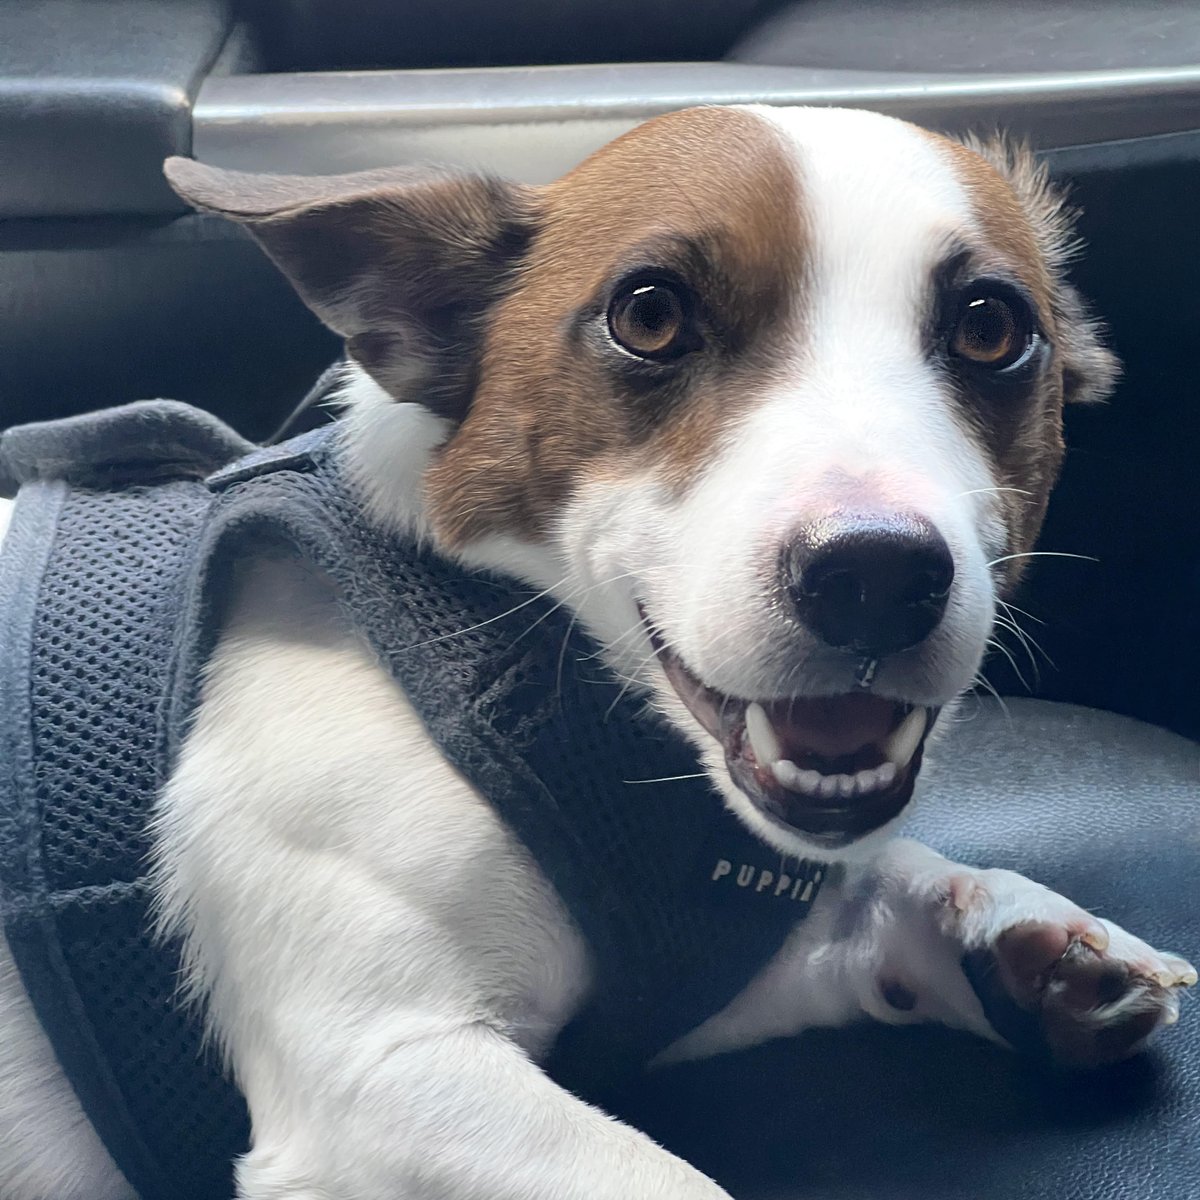 With you, in the car, going anywhere - that’s my definition of paradise.

#dogfriendlynyc #dogsofnyc #jackrussellnation #nyc
#9gag #barked #animalsdoingthings #jrt #jackrusselldog #astro #dogs  #dog  #cute #cuteness #cutenessoverload #doggo #doglovers #doglove #doglife #happydog…